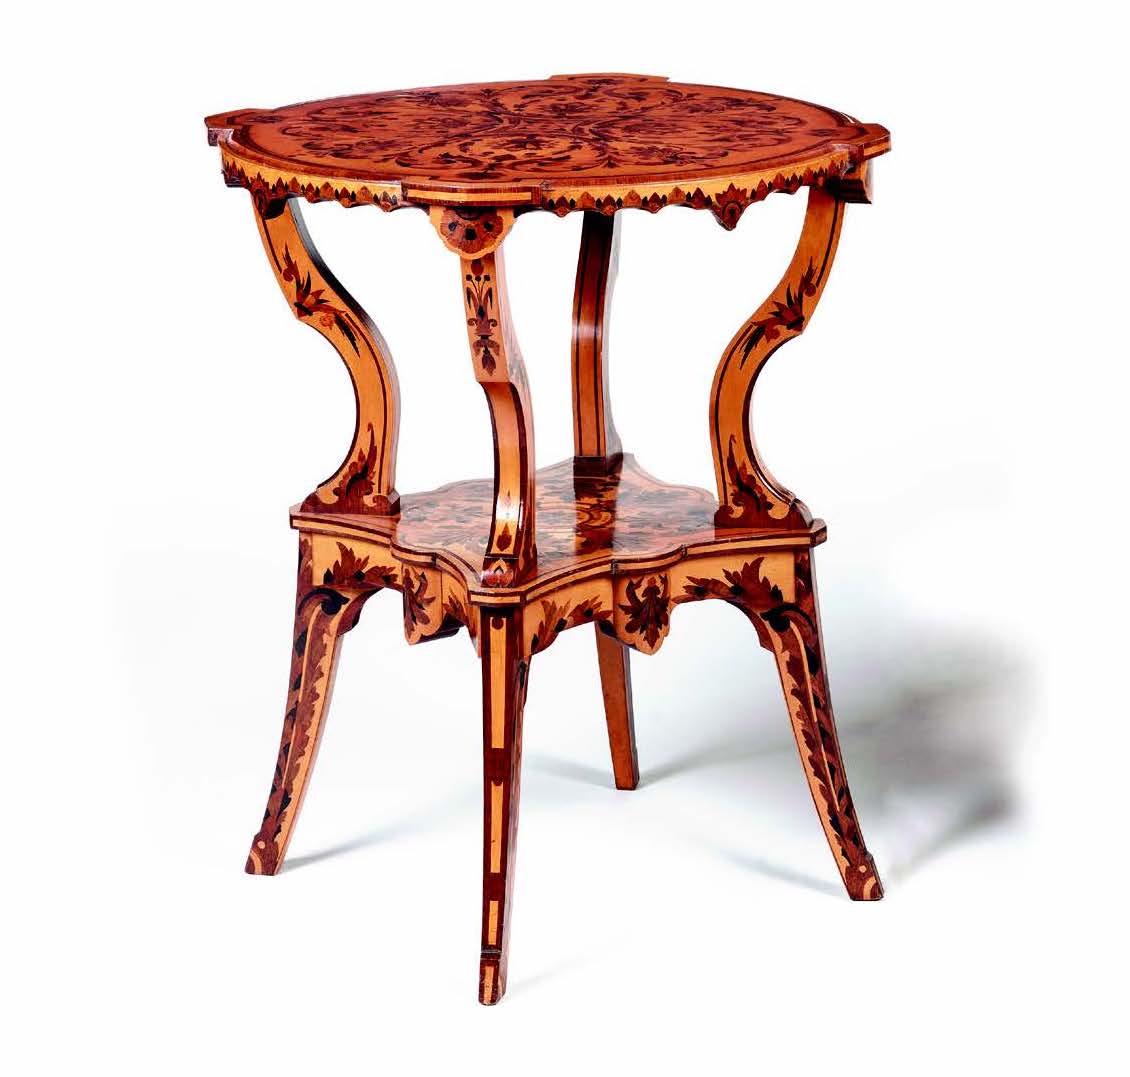 An antique marquetry table made by Jackson & Graham